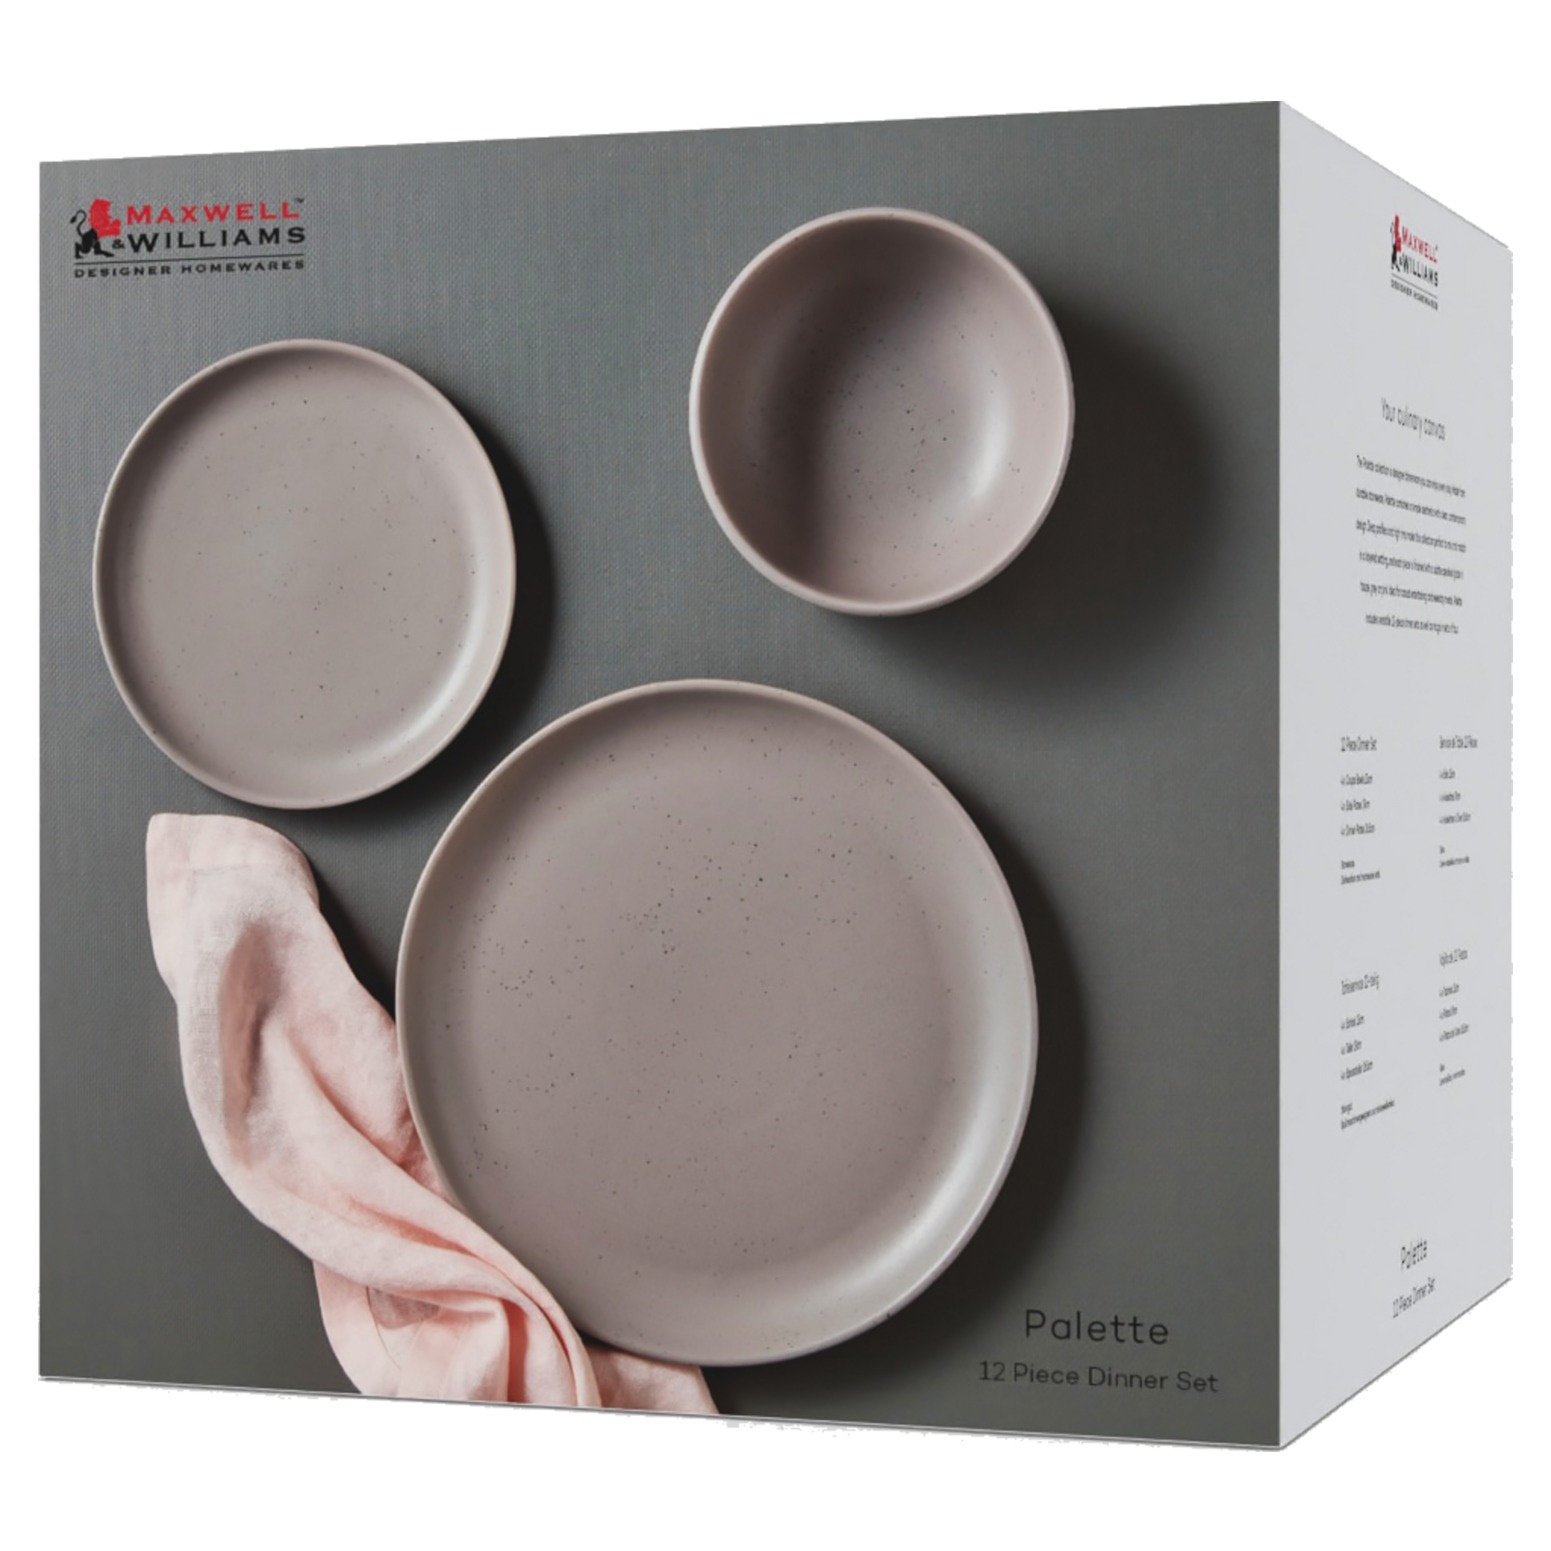 Maxwell & Williams Palette Dinner Set 12pc Grey Speckle Gift Boxed